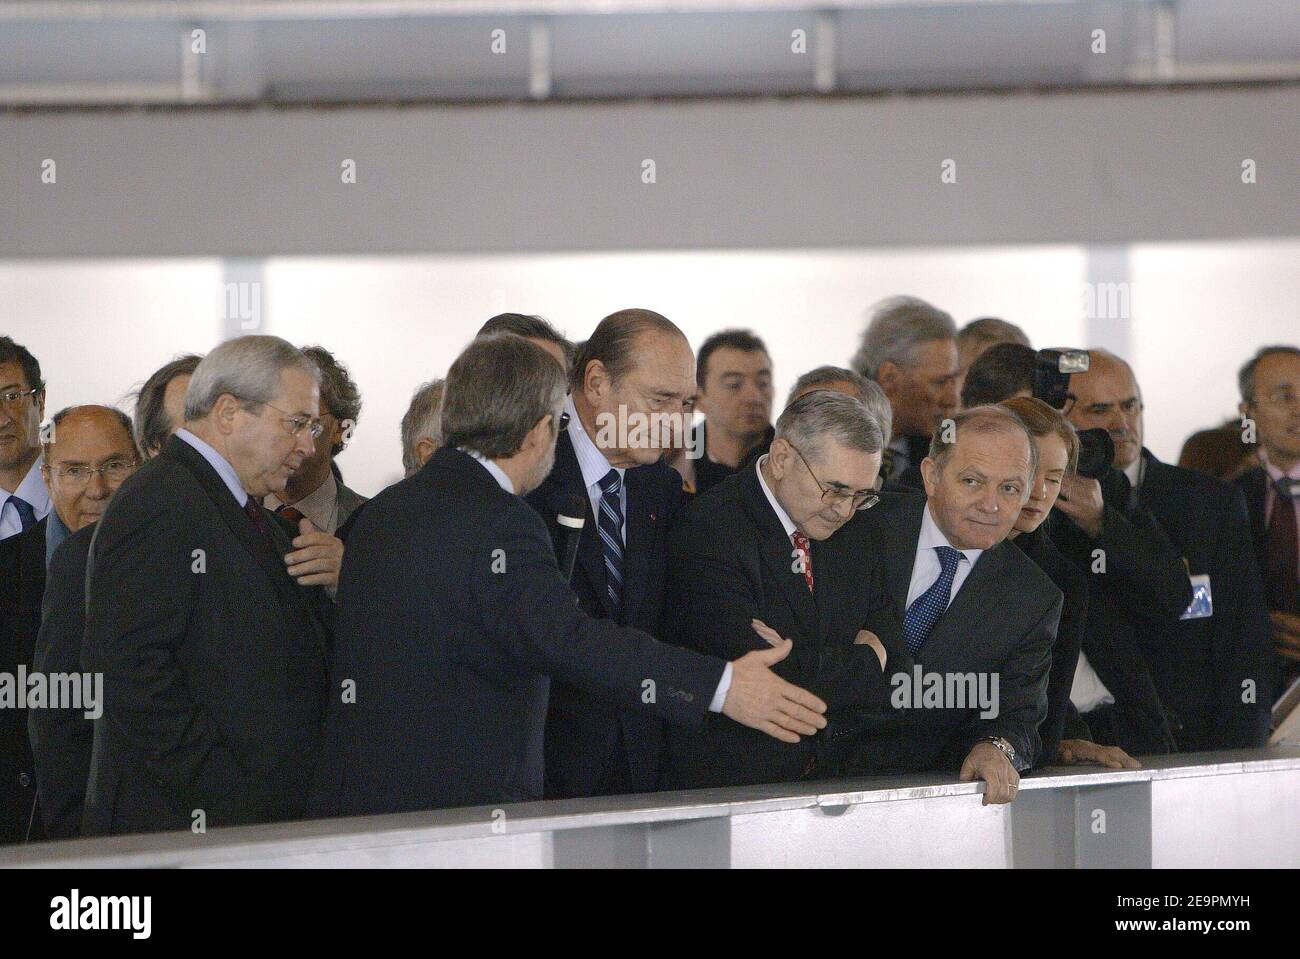 French President Jacques Chirac flanked by Jean-Marc Filhol and Jean-Paul  Huchon, inaugurates the 'Synchrotron Soleil' site, in Saint-Aubin, near  Paris, on December 18, 2006. A synchrotron is an electron accelerator meant  to